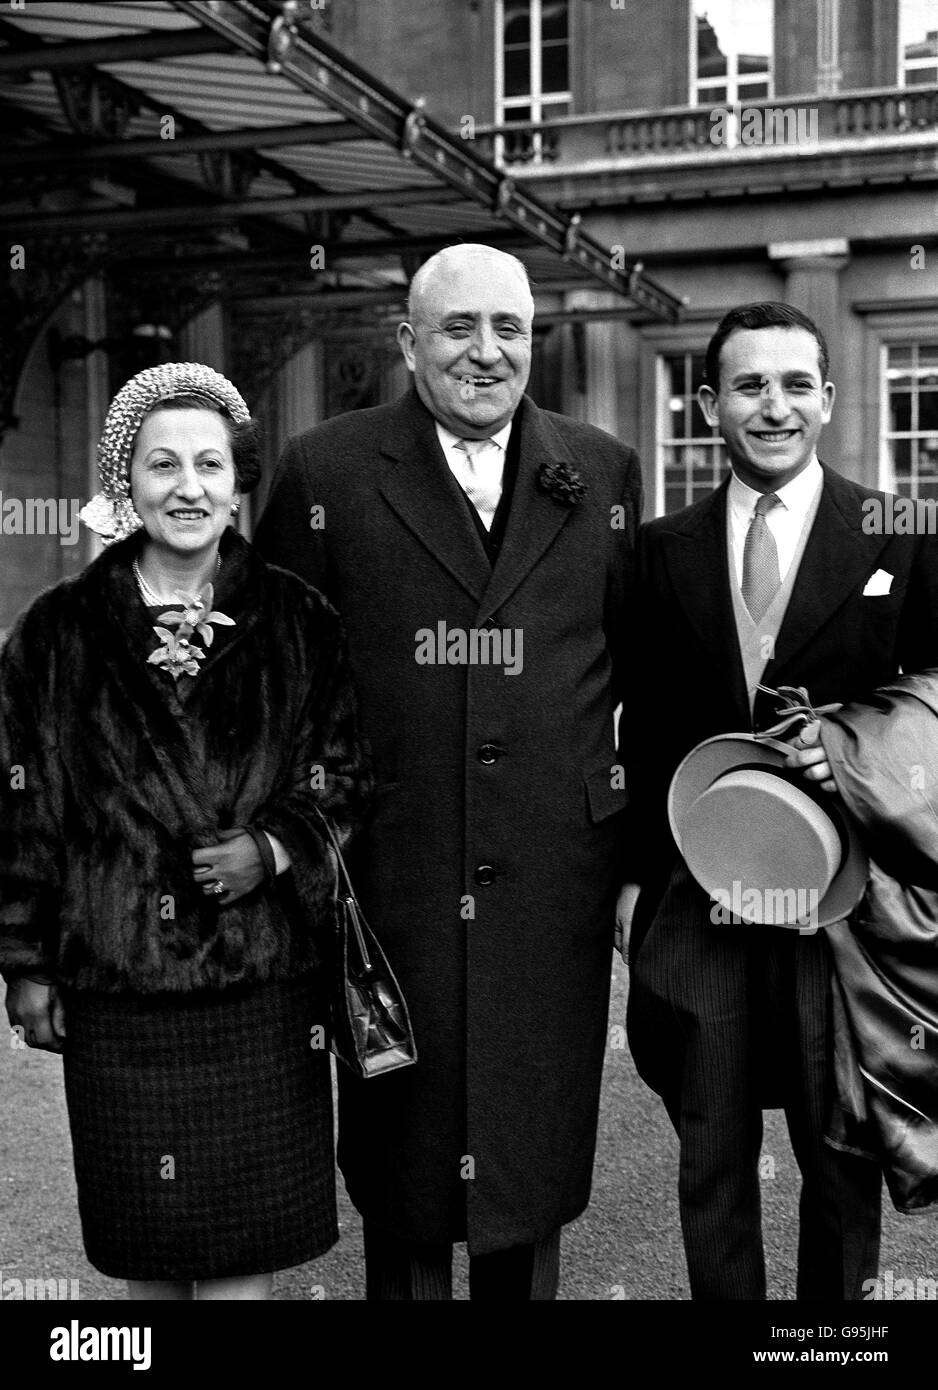 Sir Barnett Janner, 60 year old Labour MP for North-West Leicester, with his wife and son, after receiving the accolade. Sir Janner received a Knighthood in the New Years Honours. Stock Photo